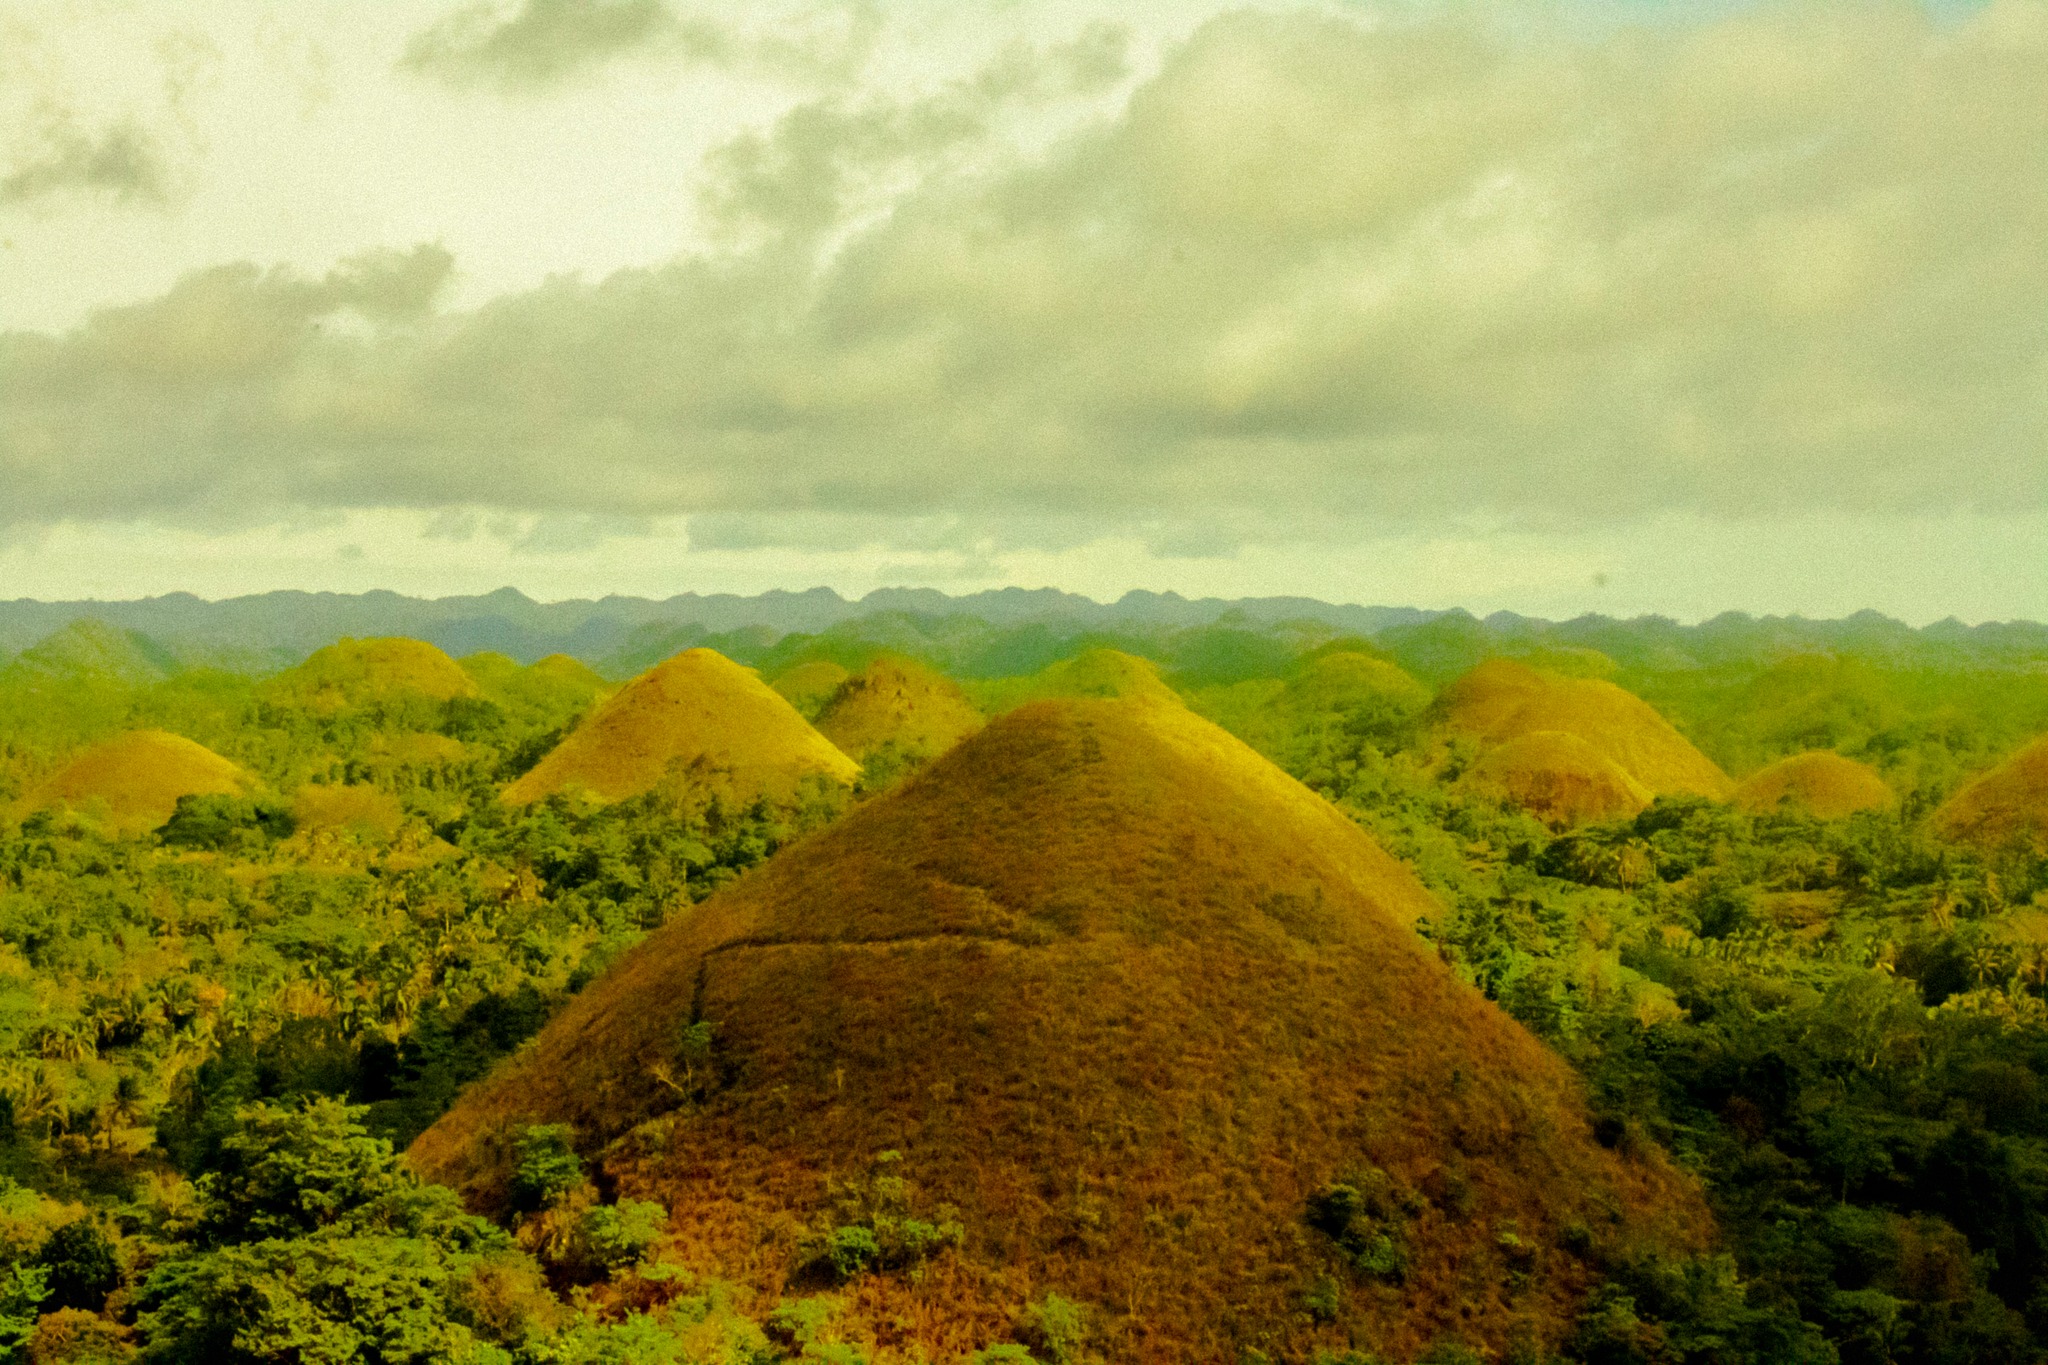 Chocolate Hills entrance fees  Not deferred, good for 3 days